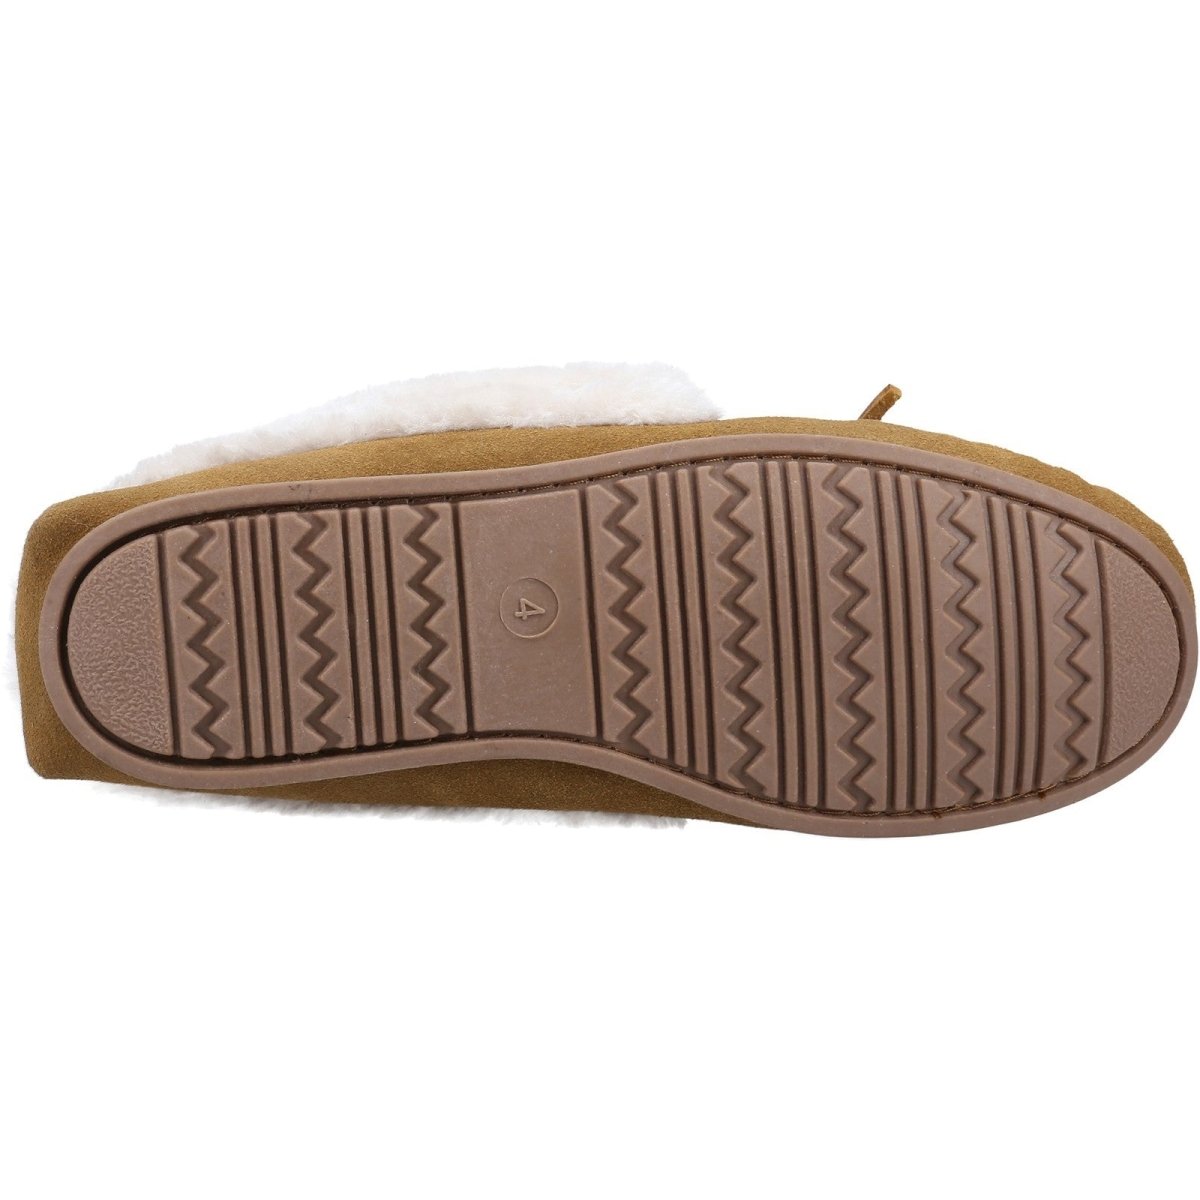 Cotswold Sopworth Suede Ladies Moccasin Slippers - Shoe Store Direct